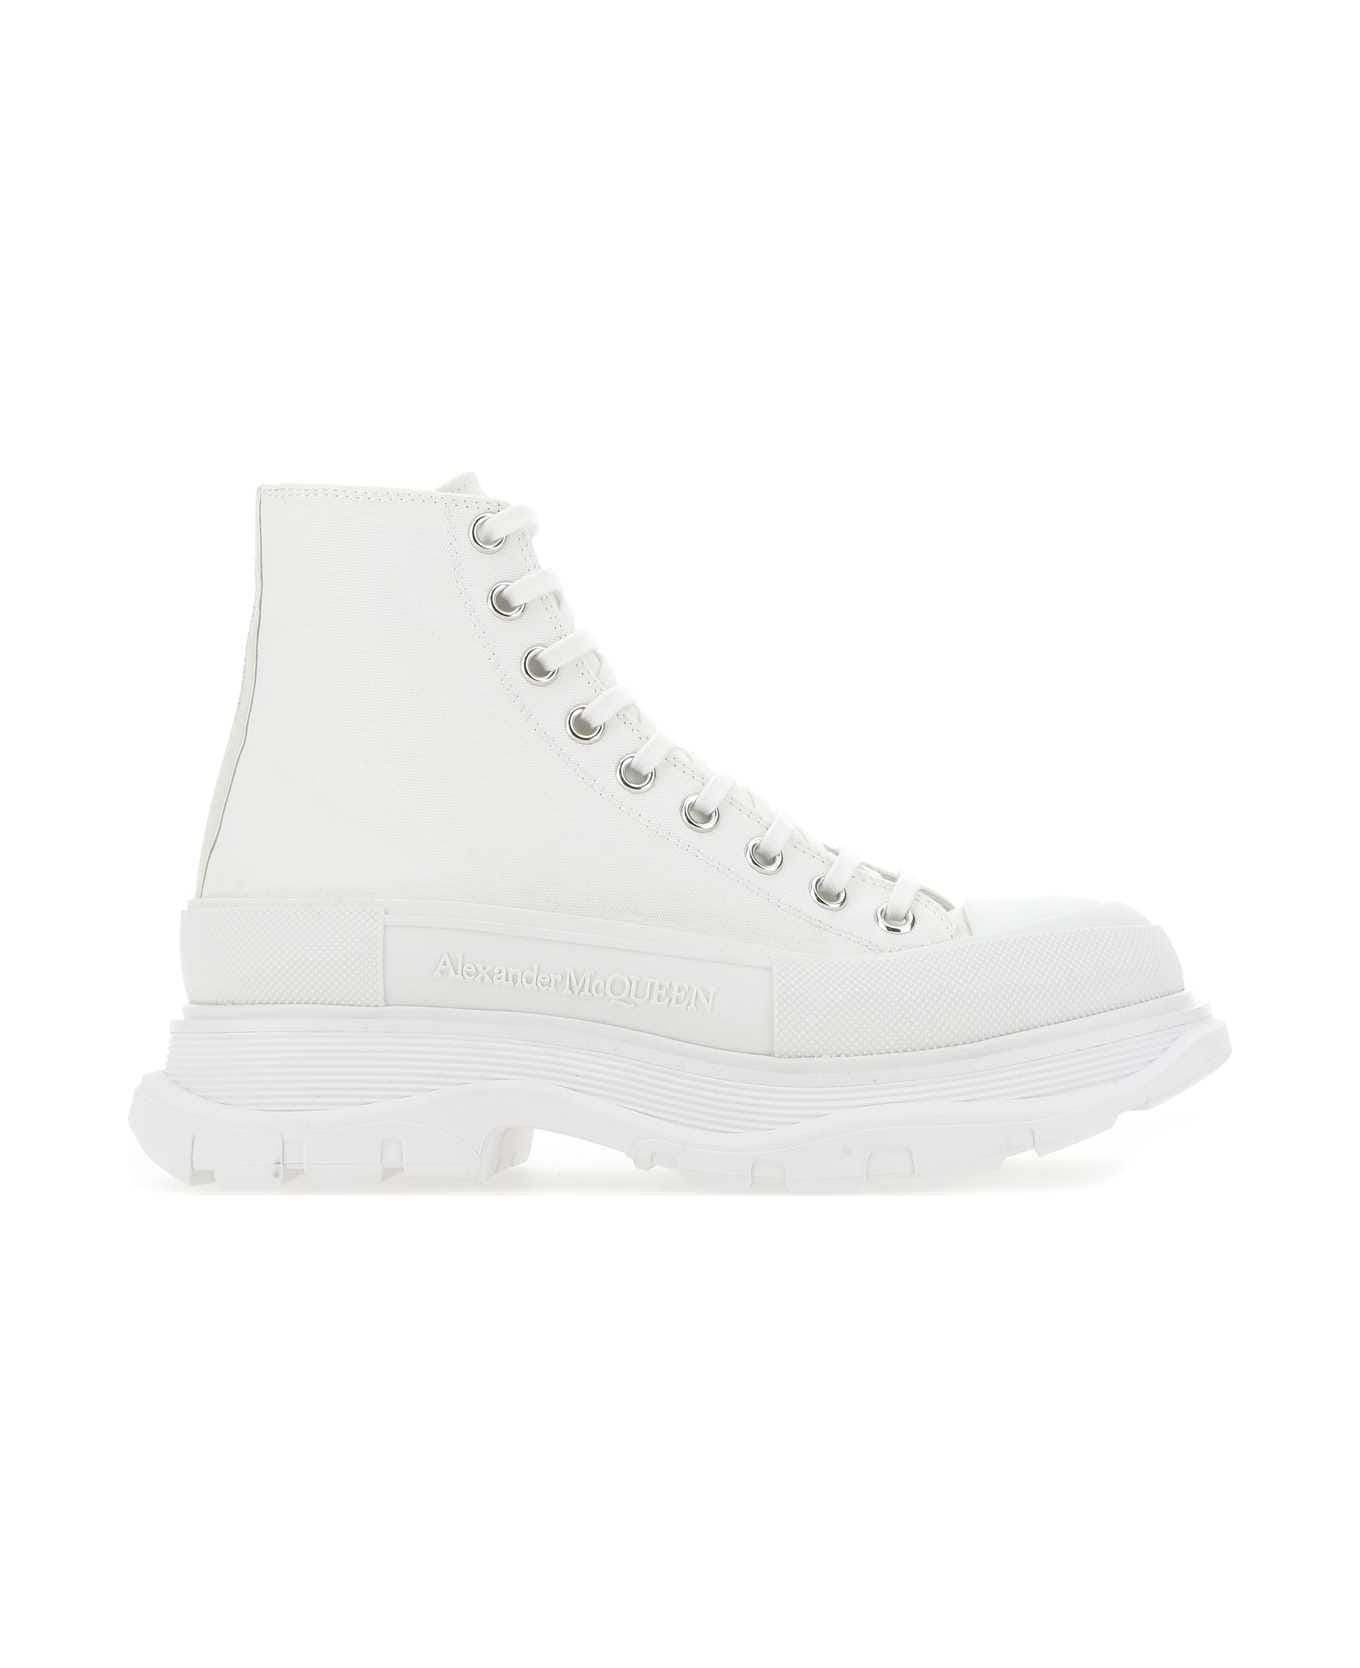 Alexander McQueen White Canvas And Rubber Tread Slick Sneakers - 9000